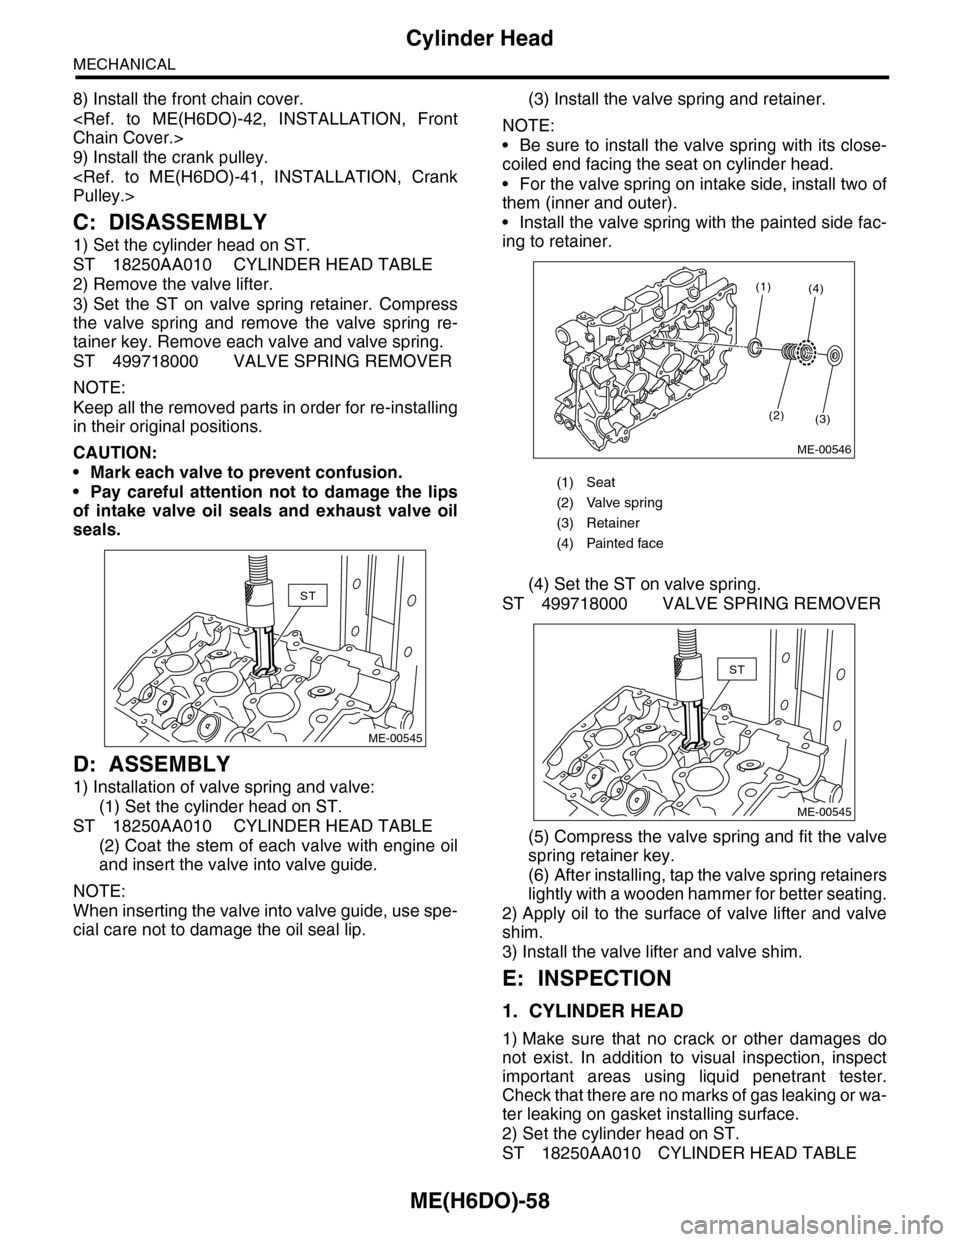 SUBARU TRIBECA 2009 1.G Service Workshop Manual ME(H6DO)-58
Cylinder Head
MECHANICAL
8) Install the front chain cover.
<Ref.  to  ME(H6DO)-42,  INSTALLATION,  Front
Chain Cover.>
9) Install the crank pulley.
<Ref.  to  ME(H6DO)-41,  INSTALLATION,  